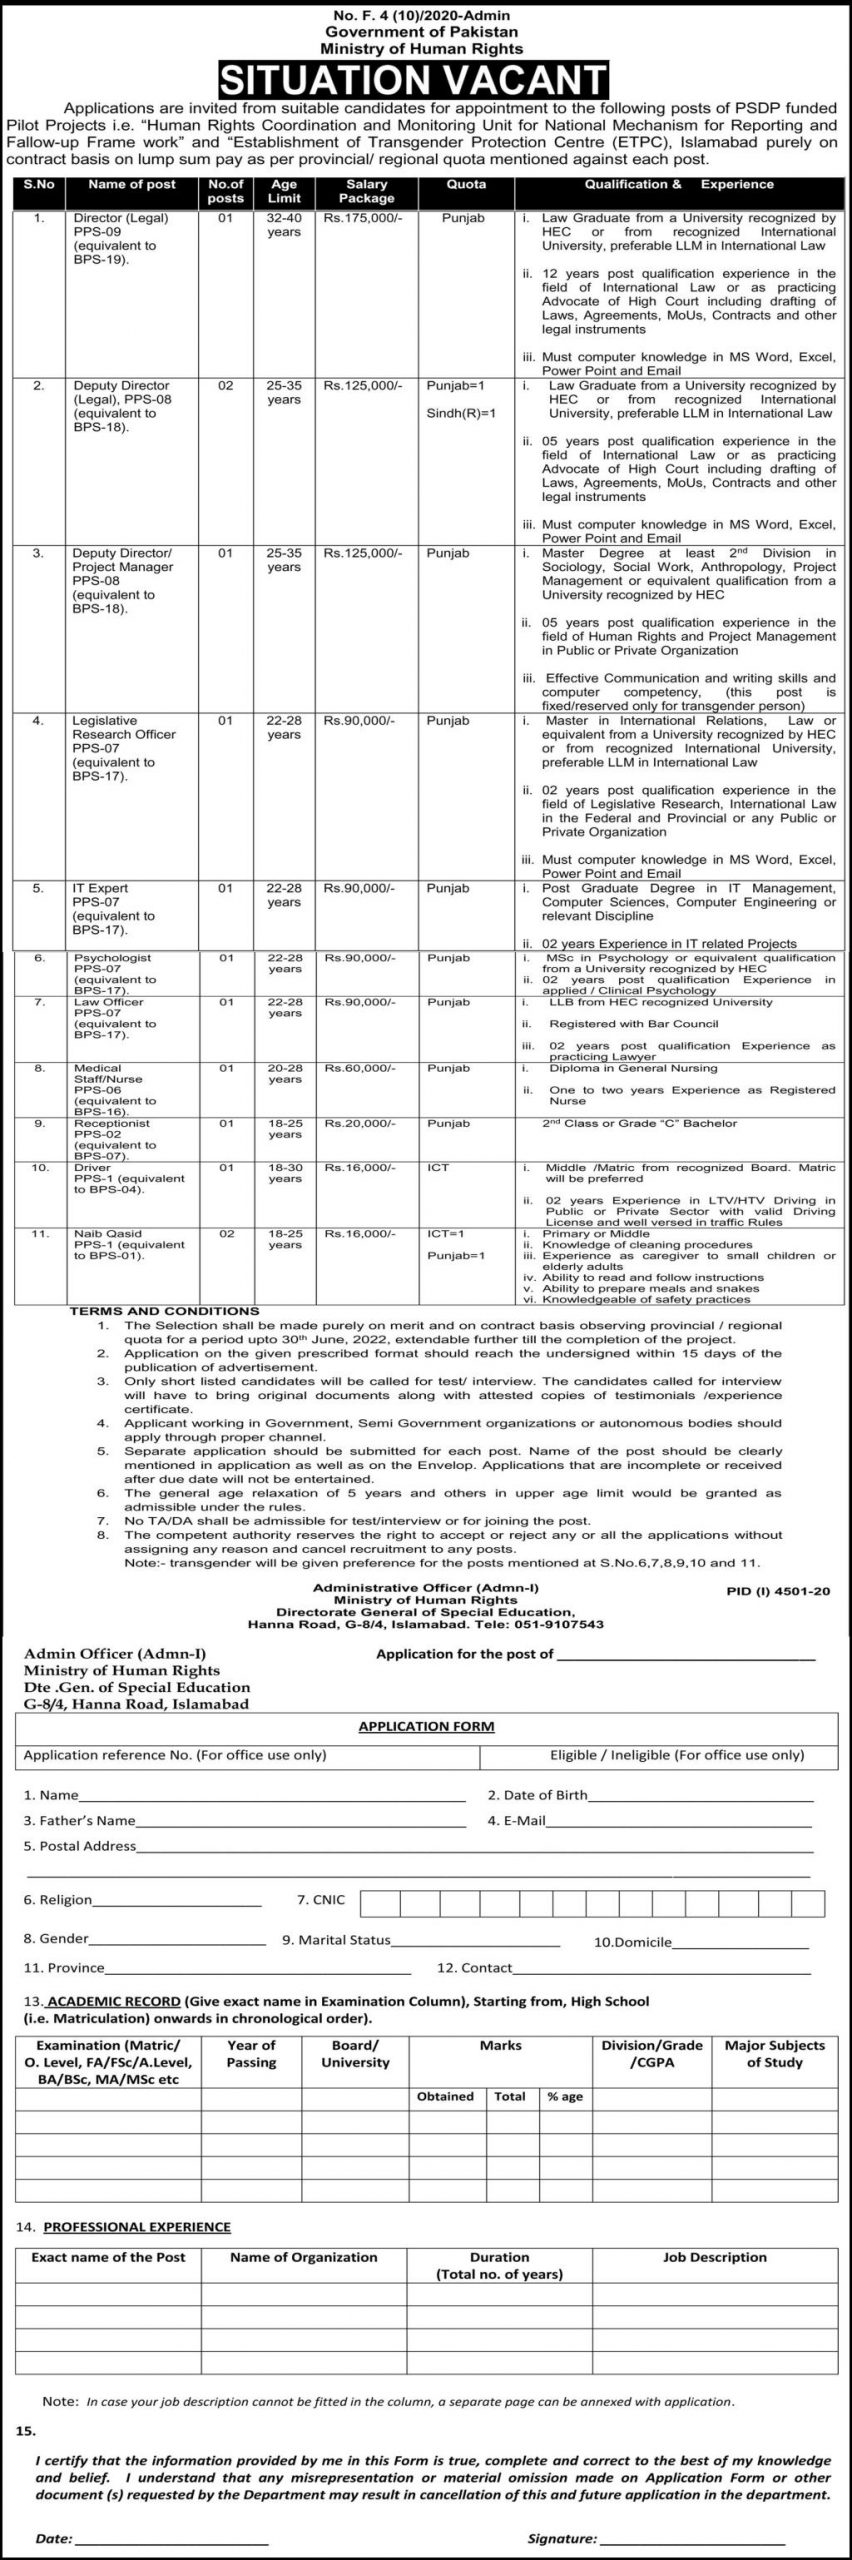 Latest Government Jobs Vacancies 2021 in Ministry of Human Rights